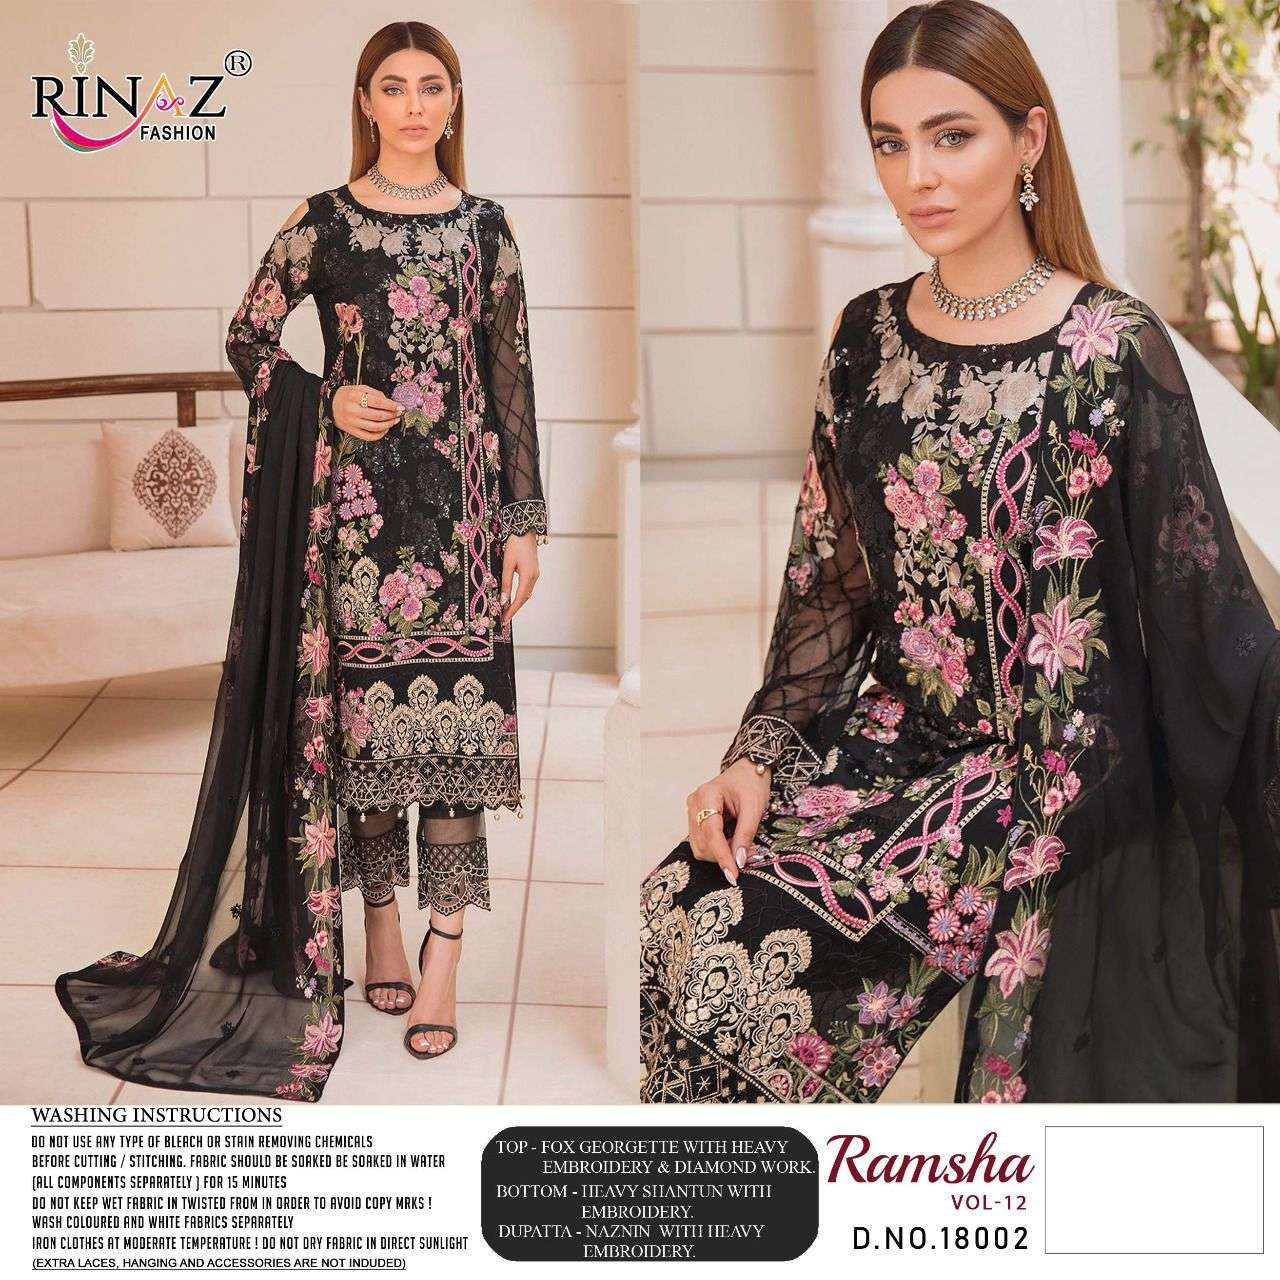 Rinaz fashion ramsha vol 12 faux georgette with embroidery work ...